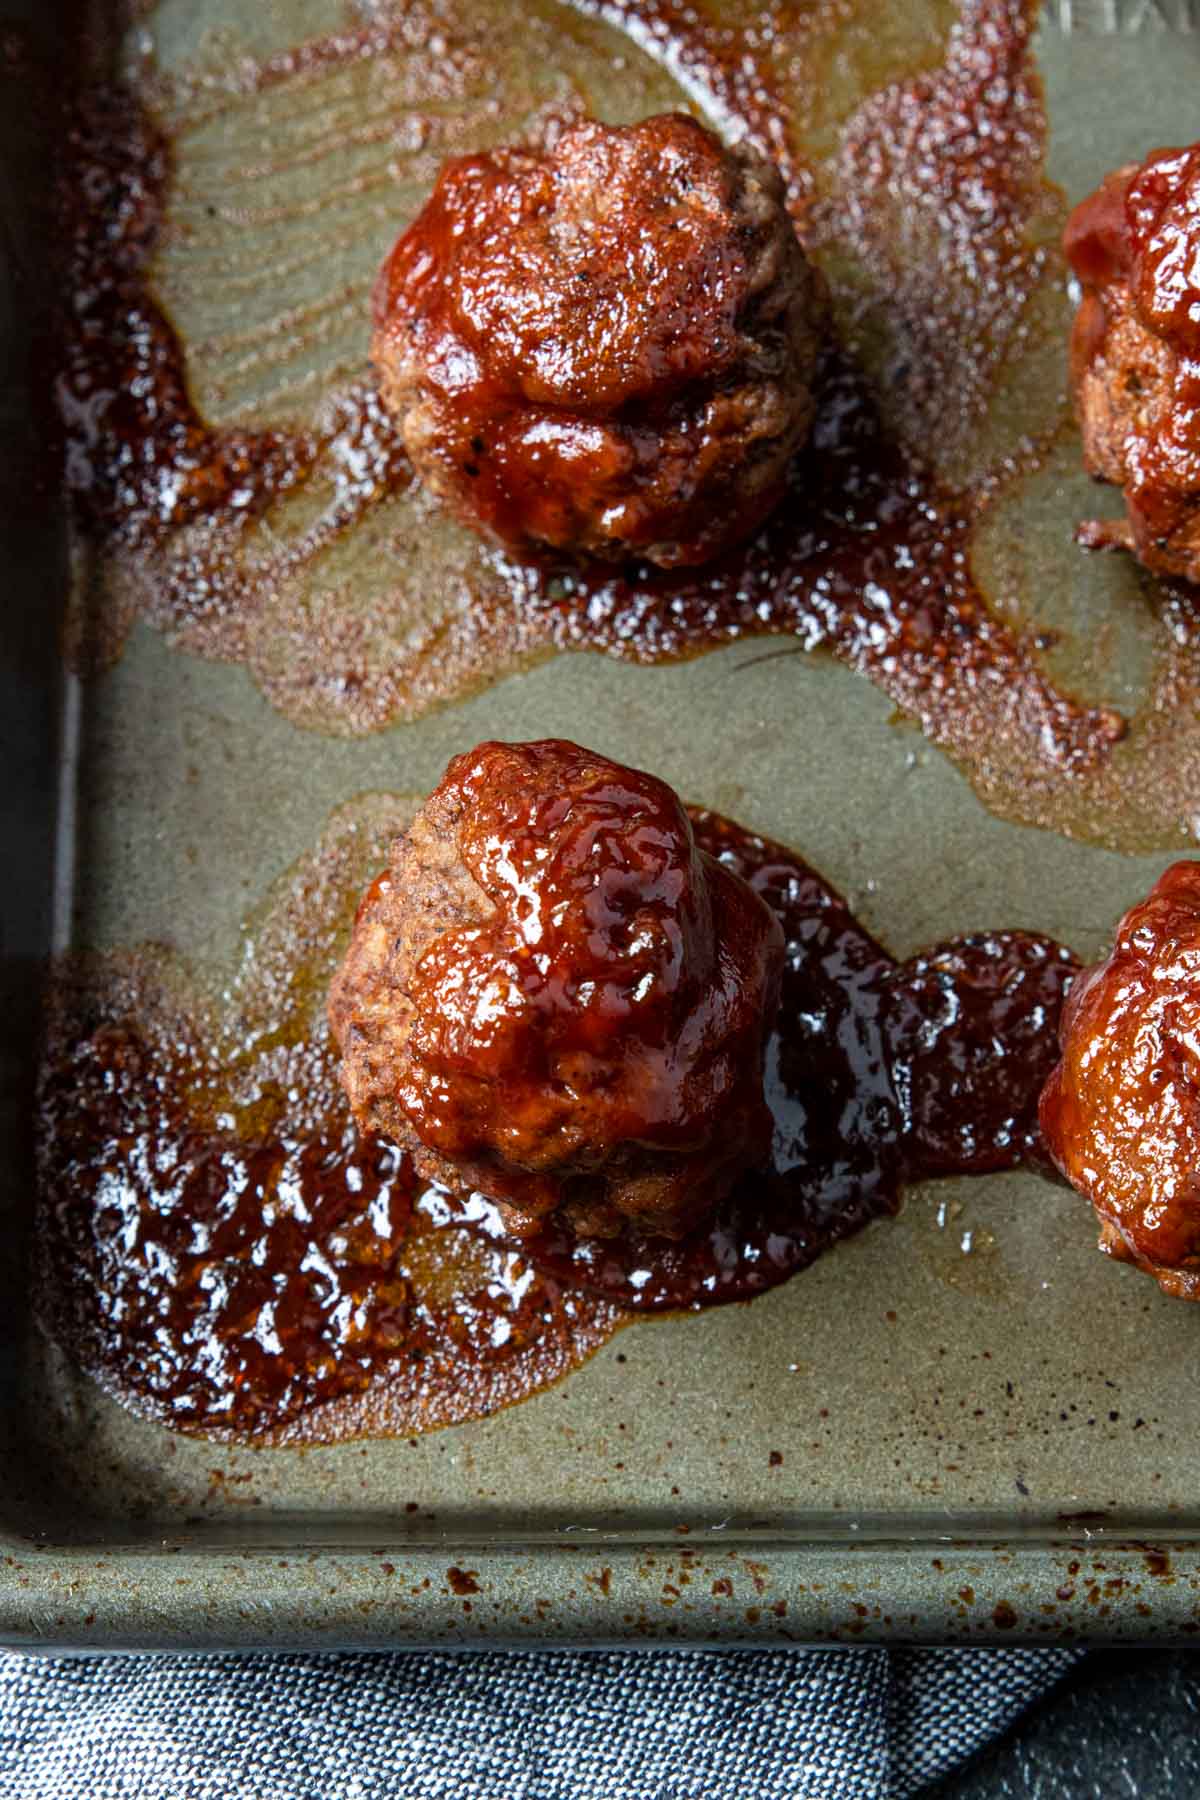 Meatballs covered in BBQ Sauce